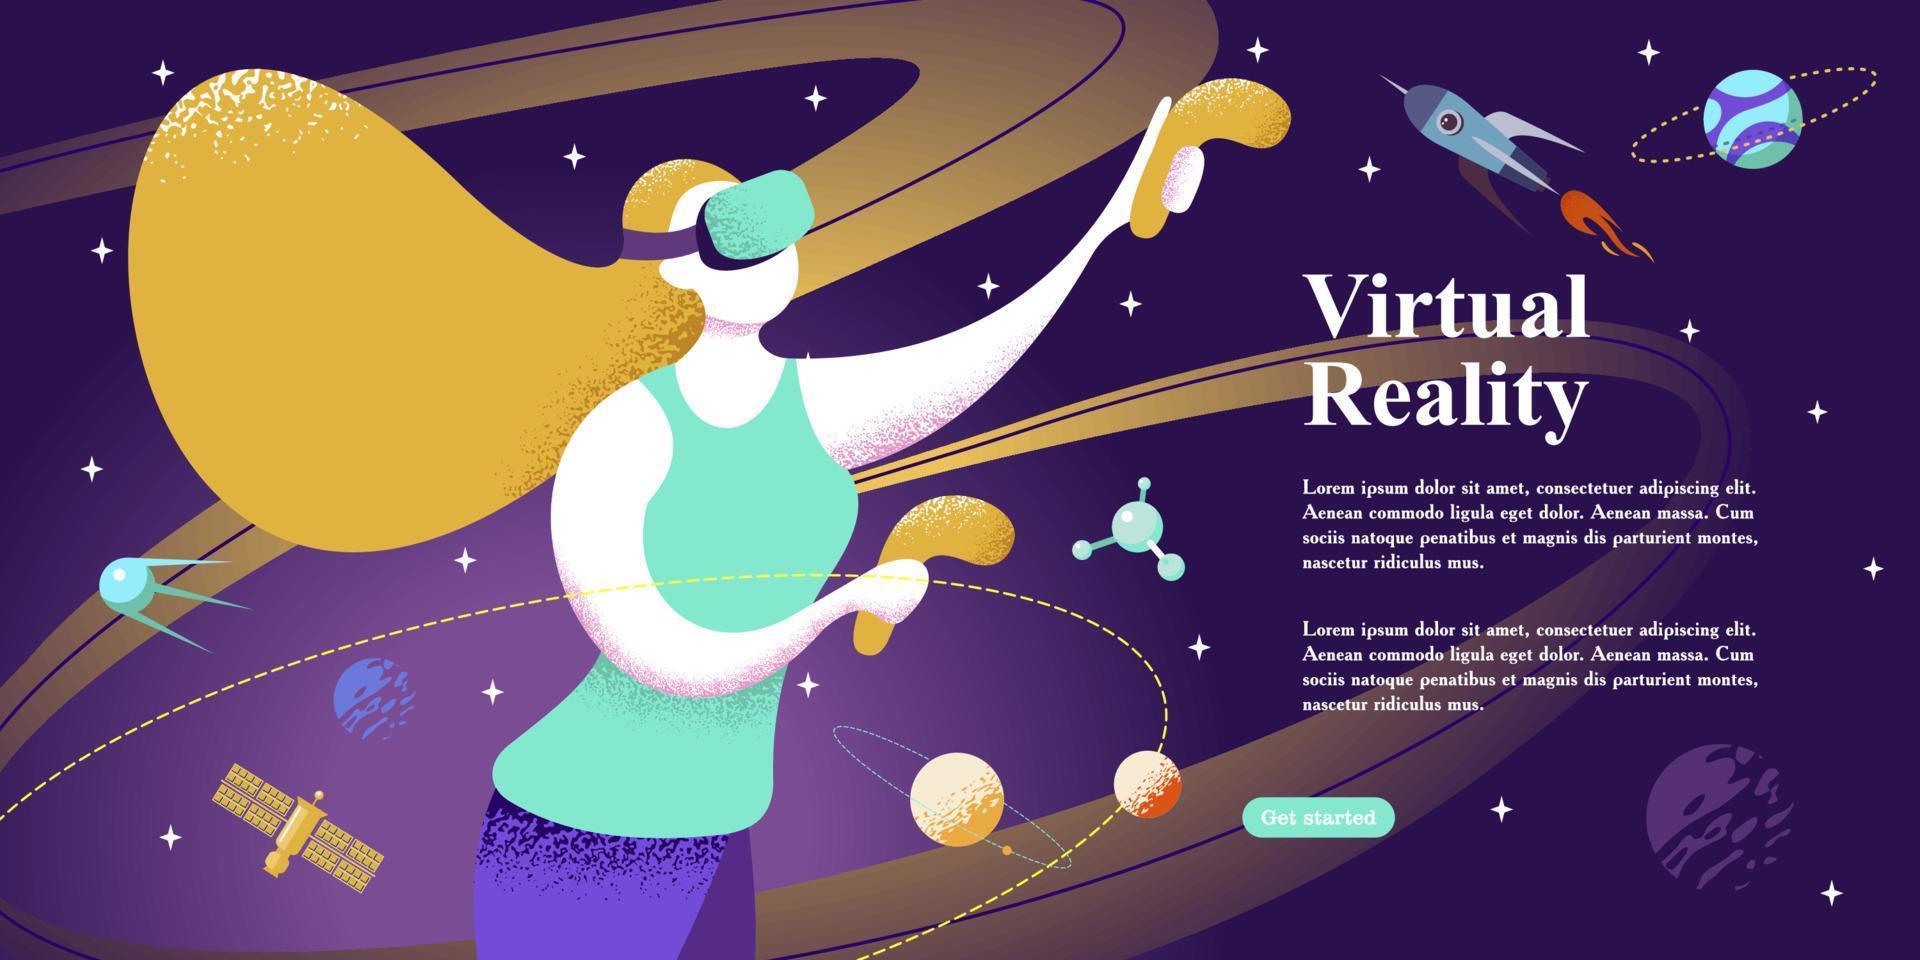 Virtual reality in space. Vector illustration. Modern technology